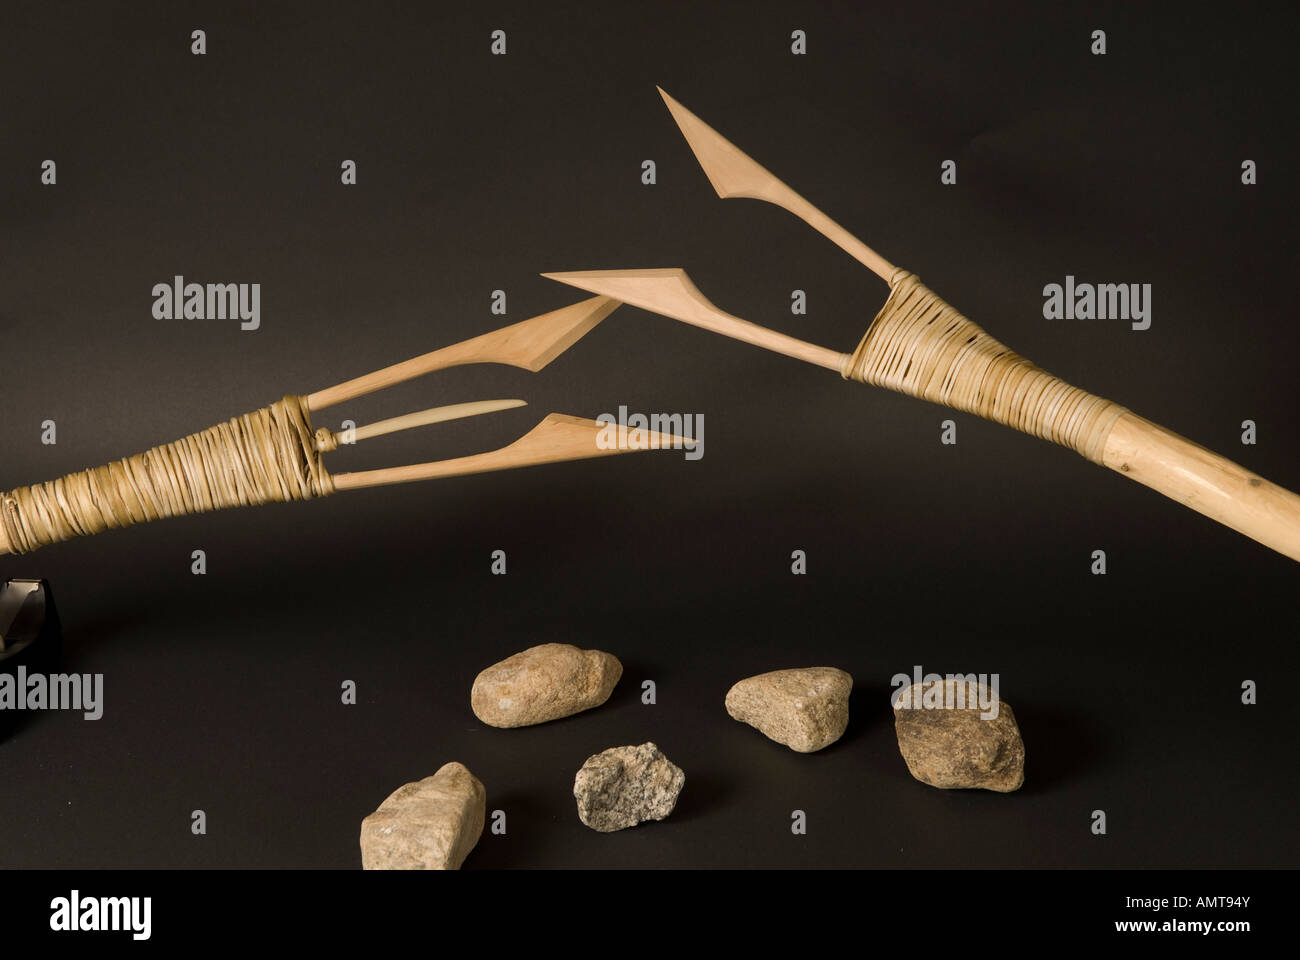 https://c8.alamy.com/comp/AMT94Y/native-american-indian-harpoons-or-spears-AMT94Y.jpg